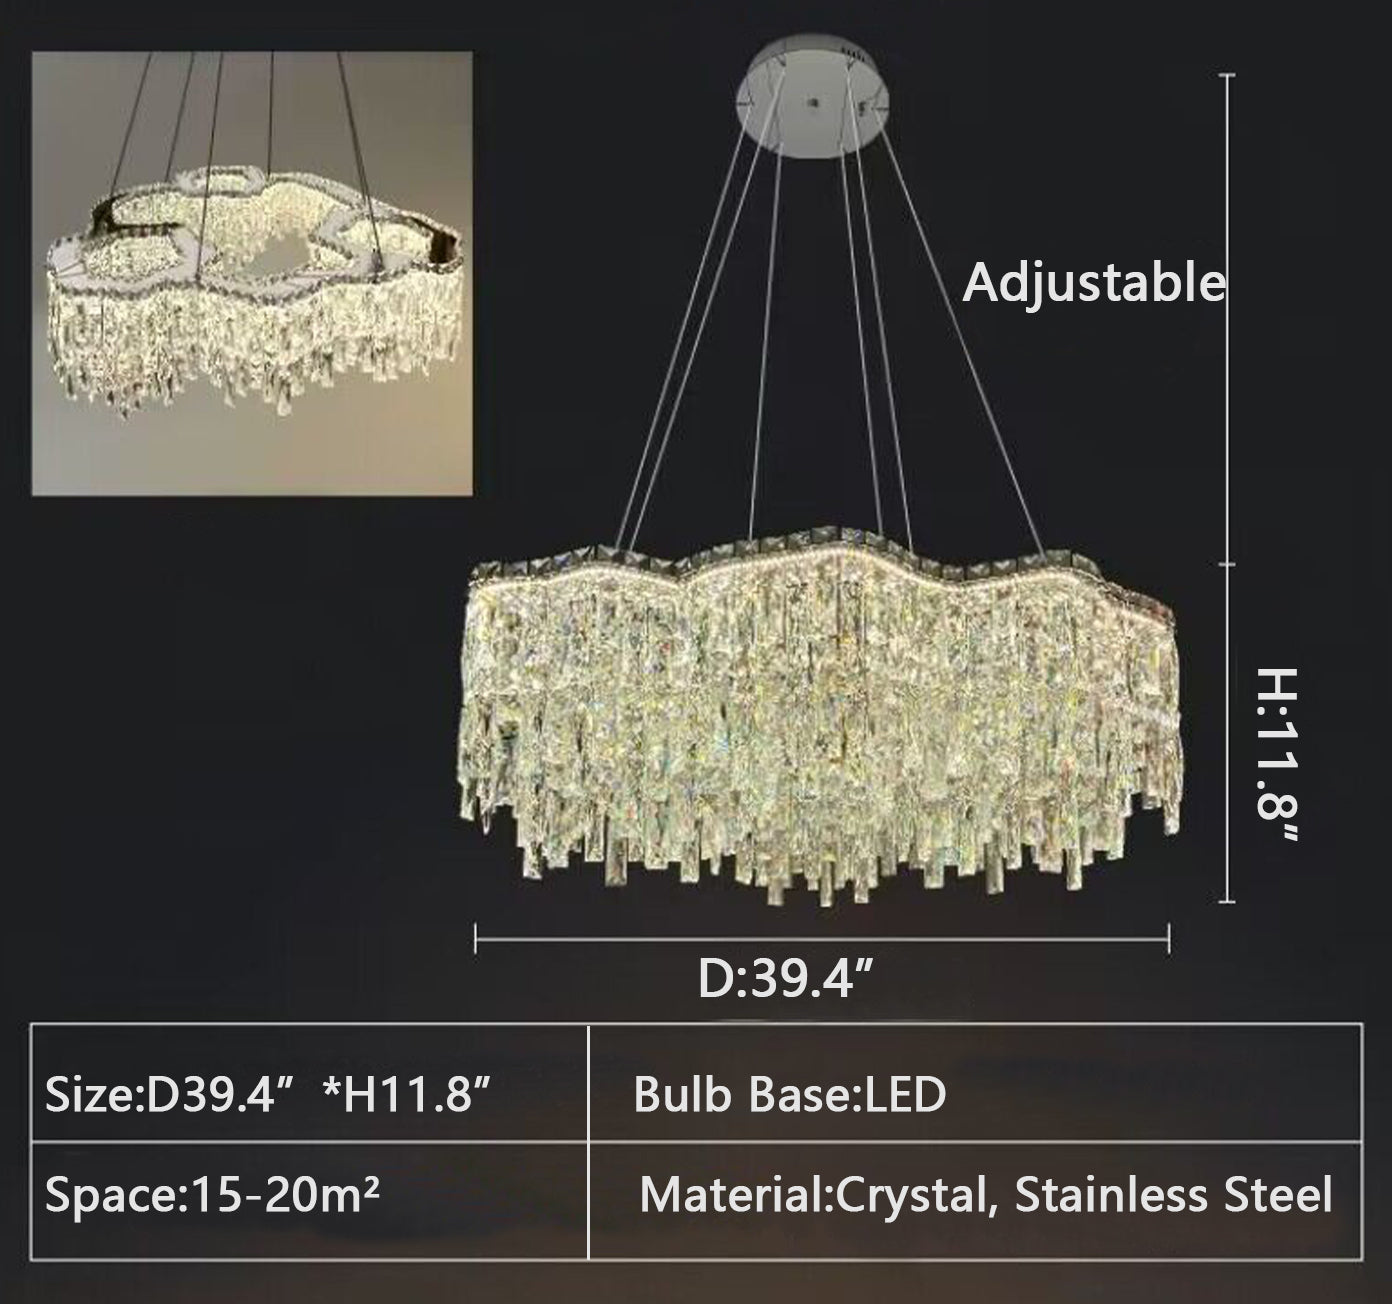 1Layer: D39.4"*H11.8" chandelier,chandeliers,pendant,rods,crystal,metal,stainless steel,clound,rectangle,oval,round,rings,ceiling,kitchen island,kitchen bar,bar,dinng table,dining bar,living room,bedroom,bathroom,home office